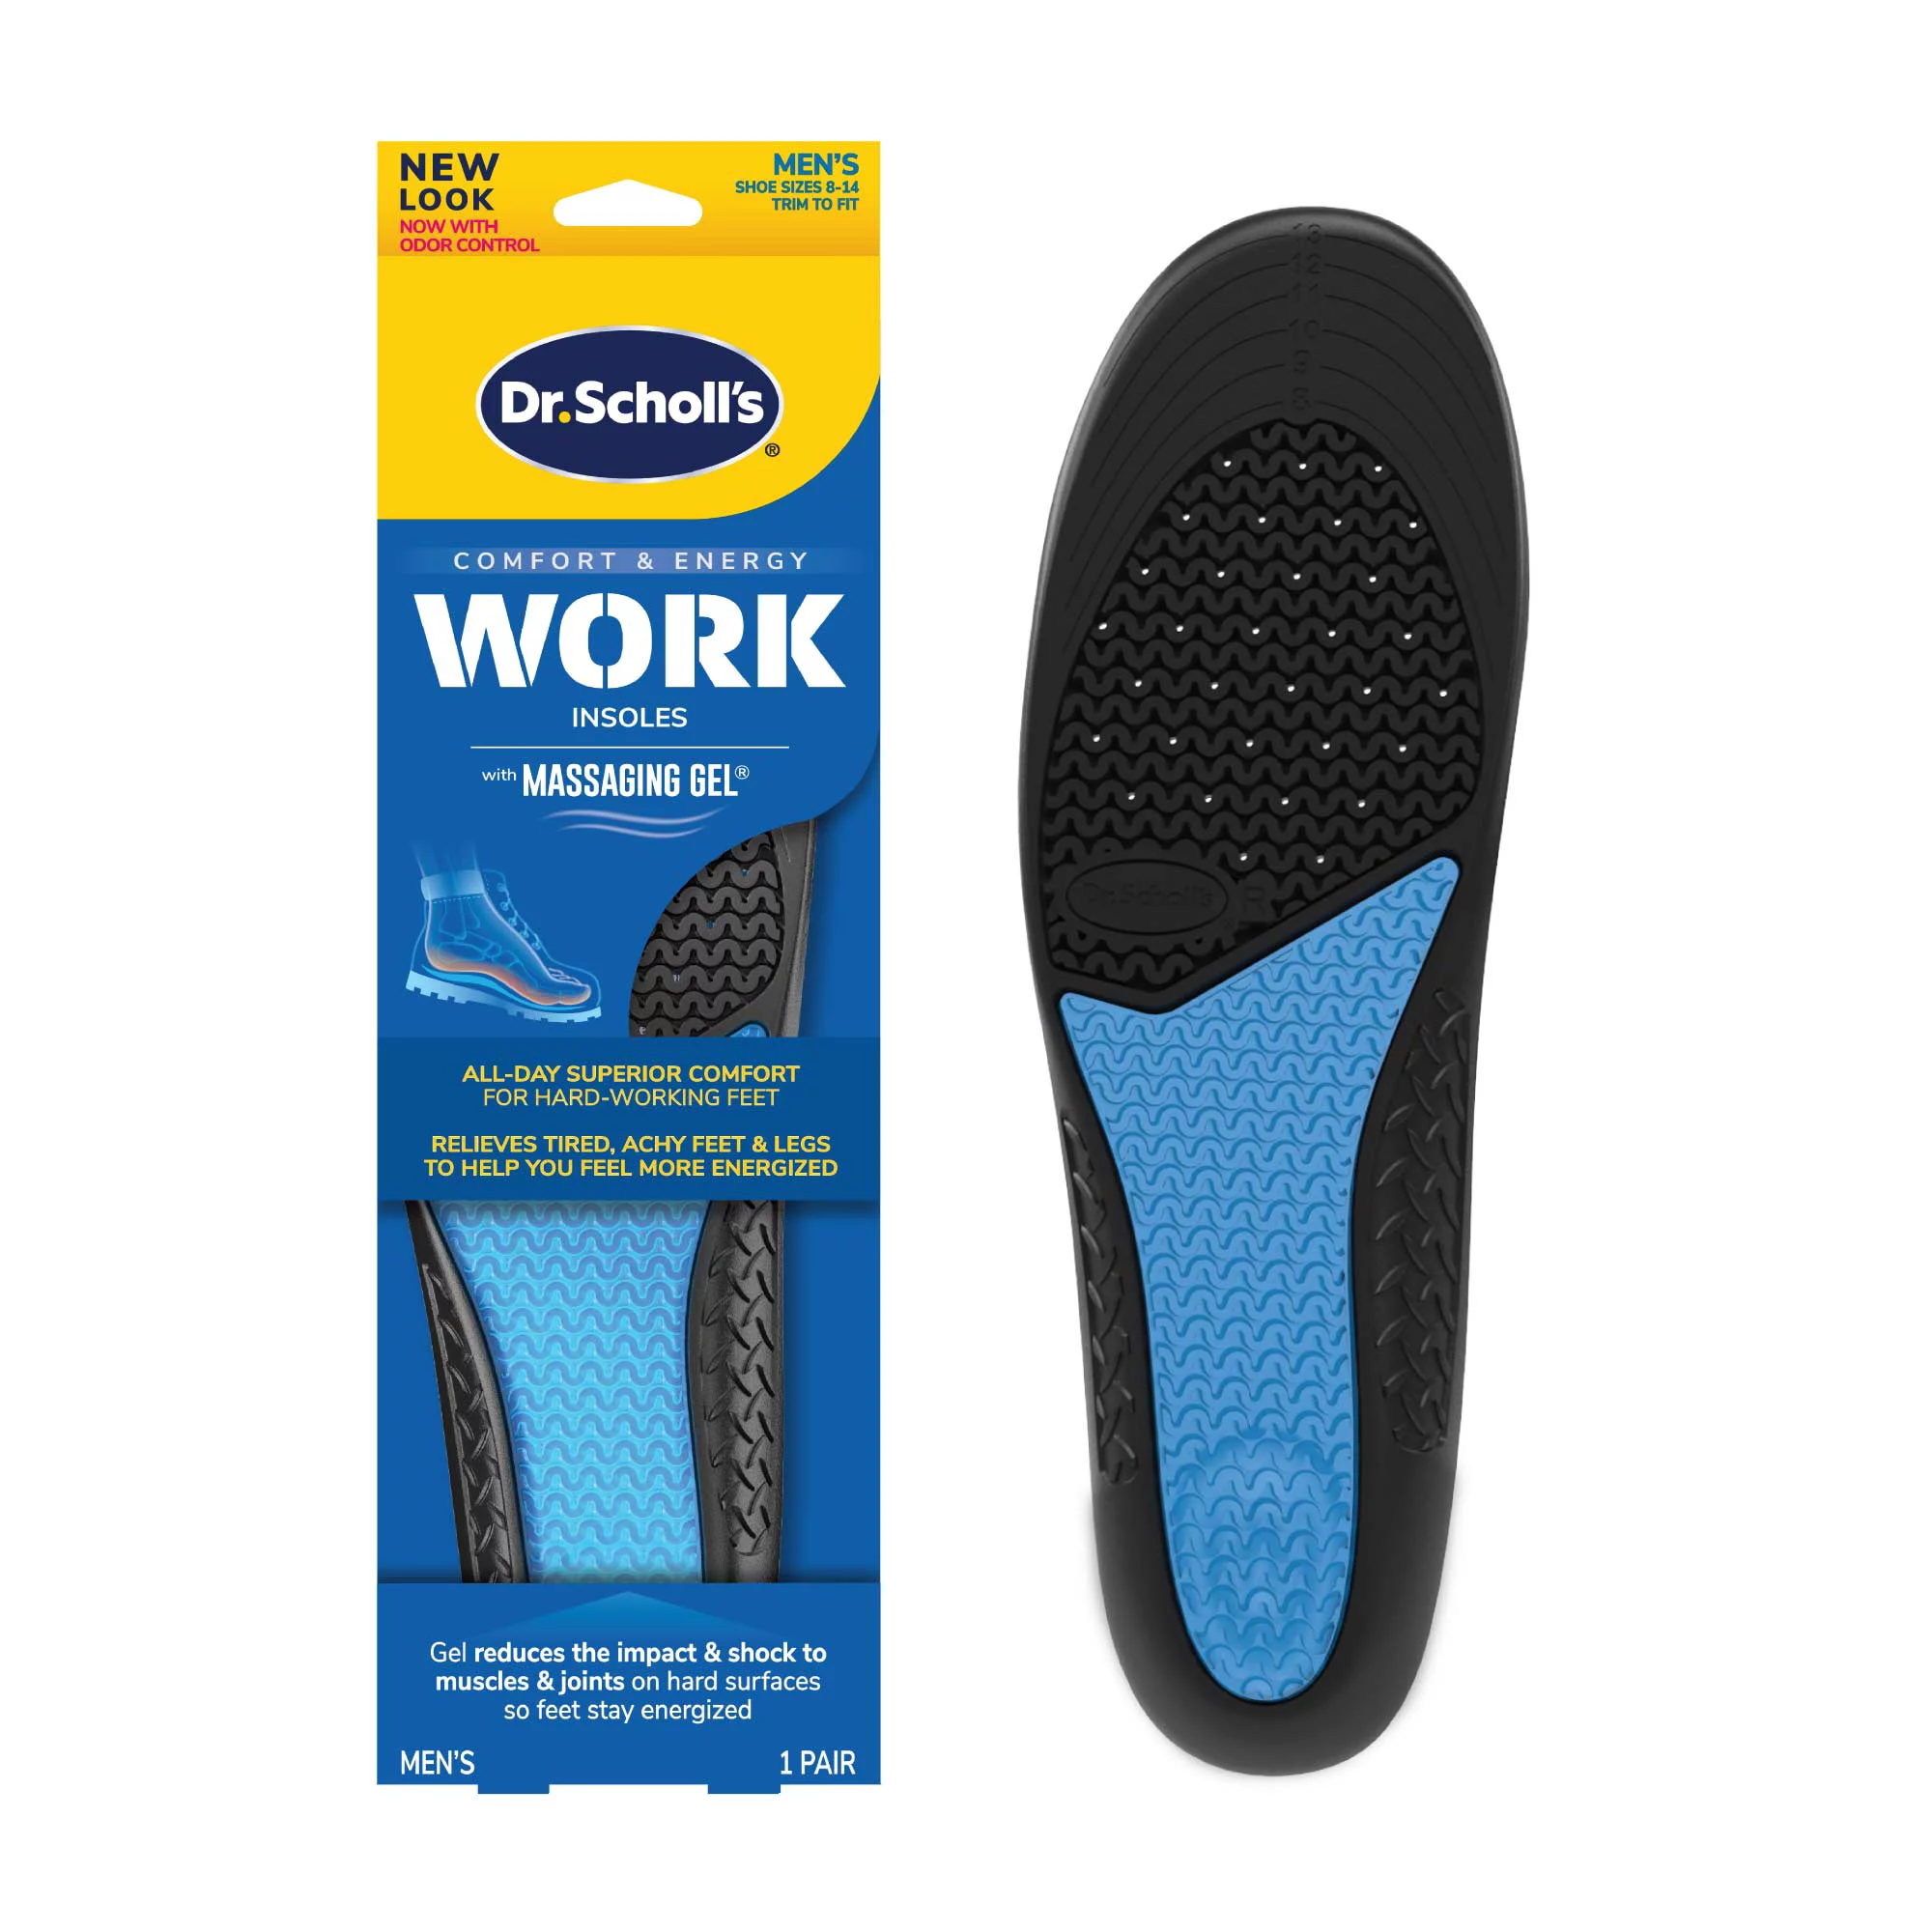 Step into comfort using Dr. Scholl's Insole.